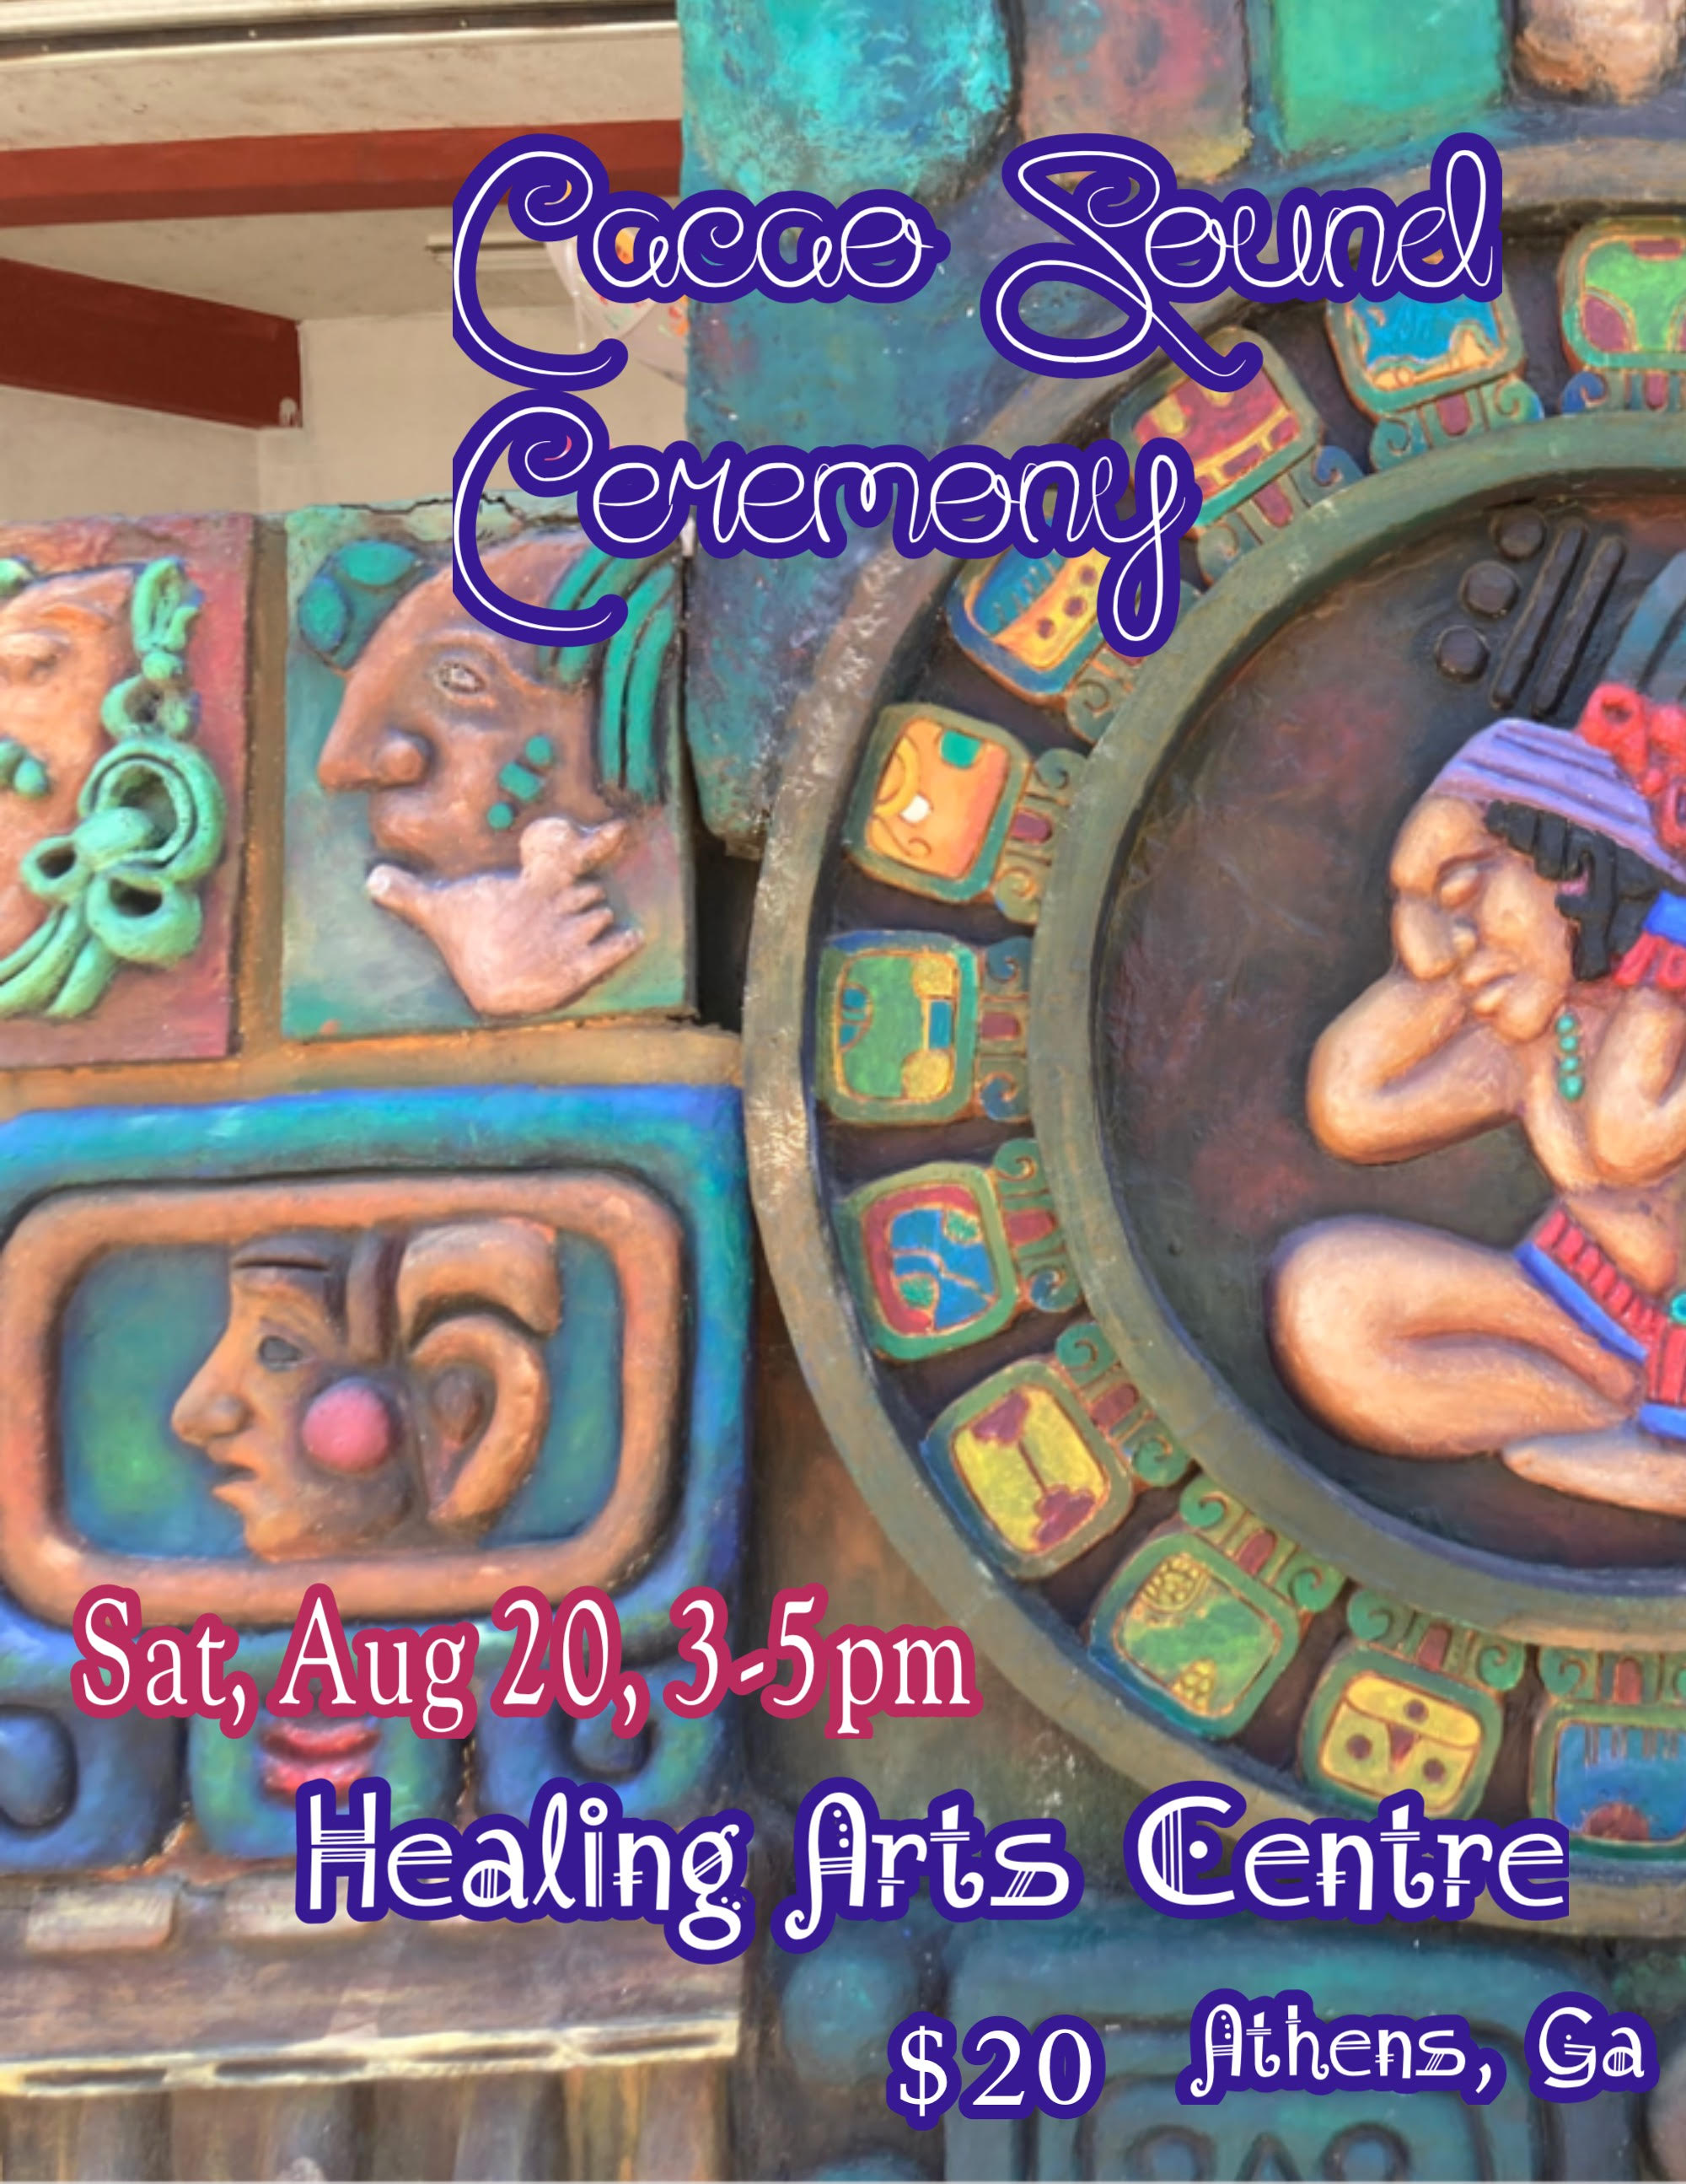 Cacao Sound Ceremony- Live at the Athens Healing Arts Centre